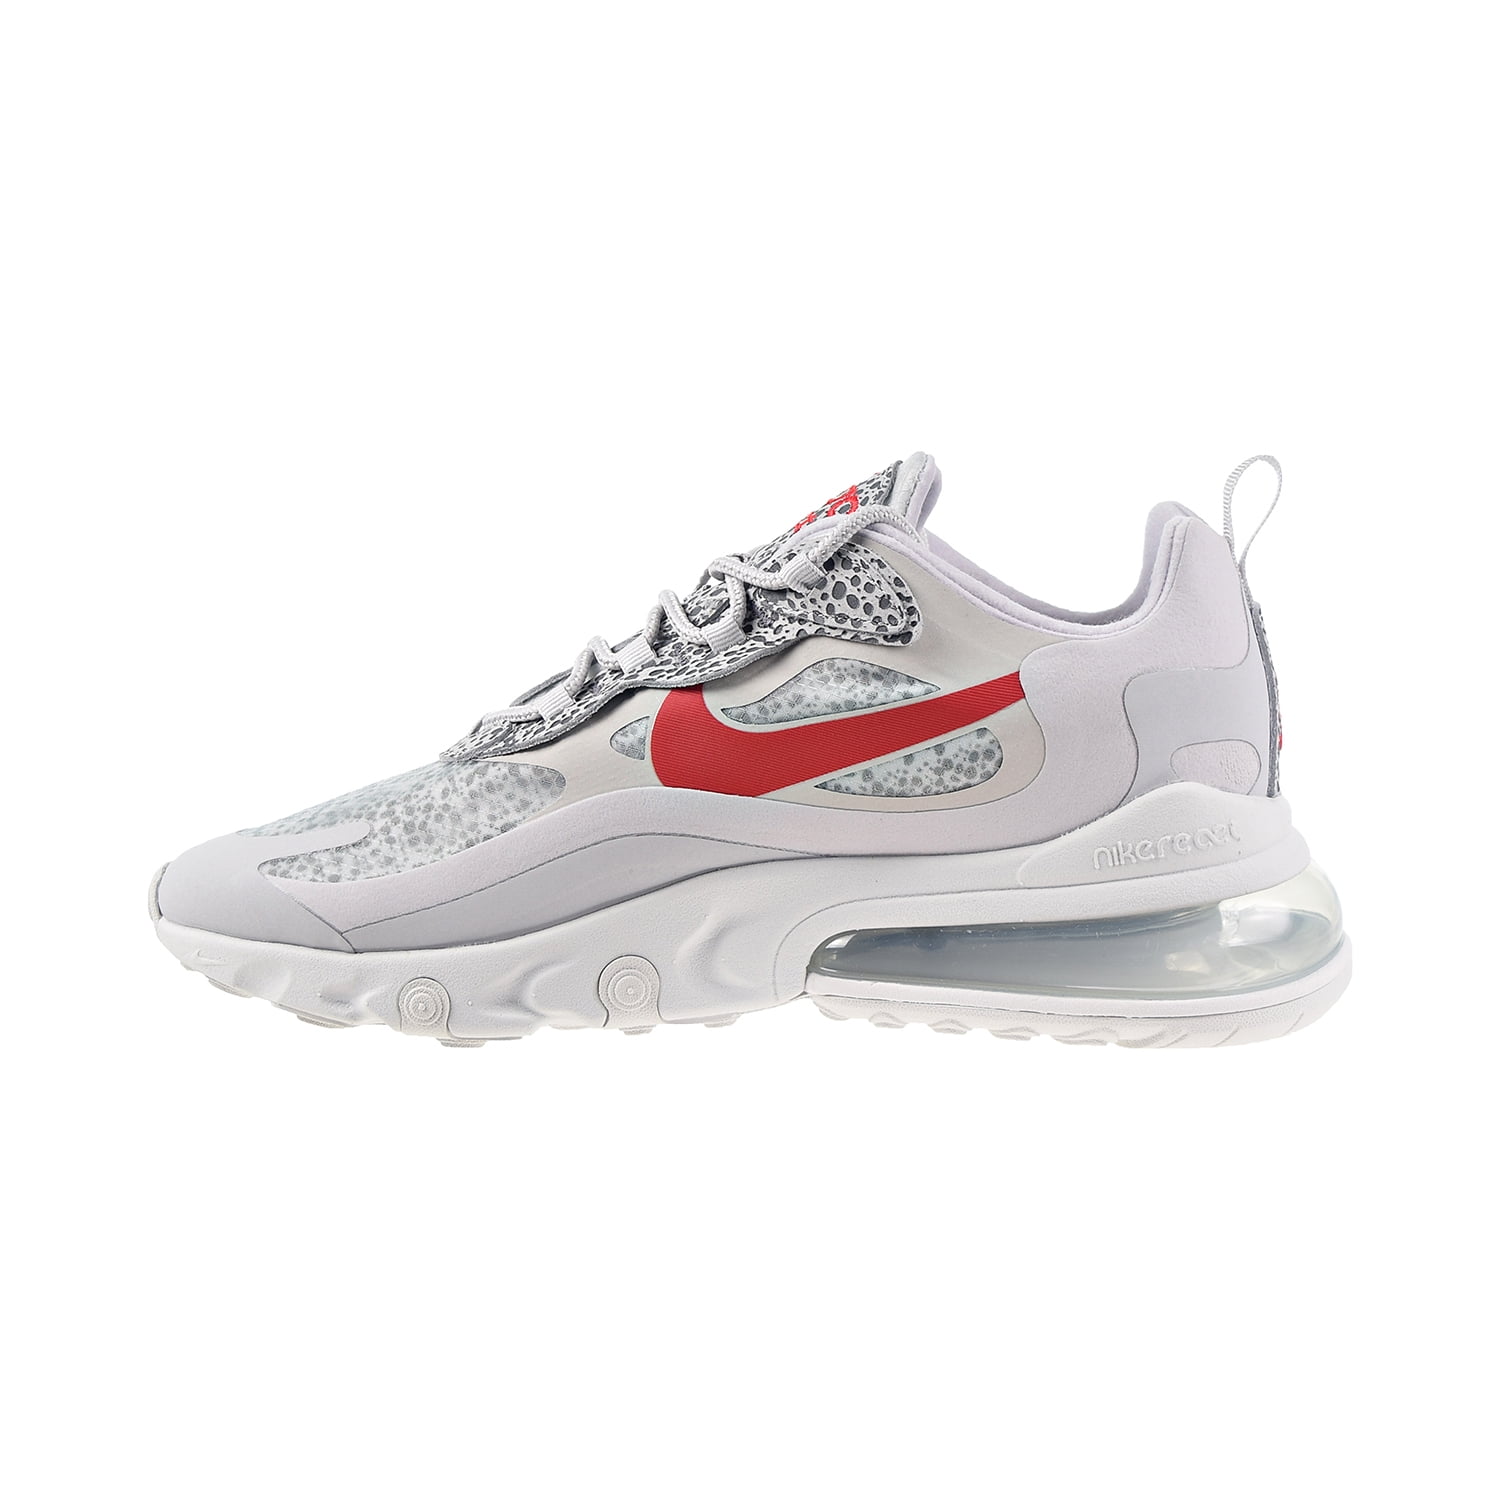 Nike Air Max 270 React Neutral Grey/University Red - CT2535-001